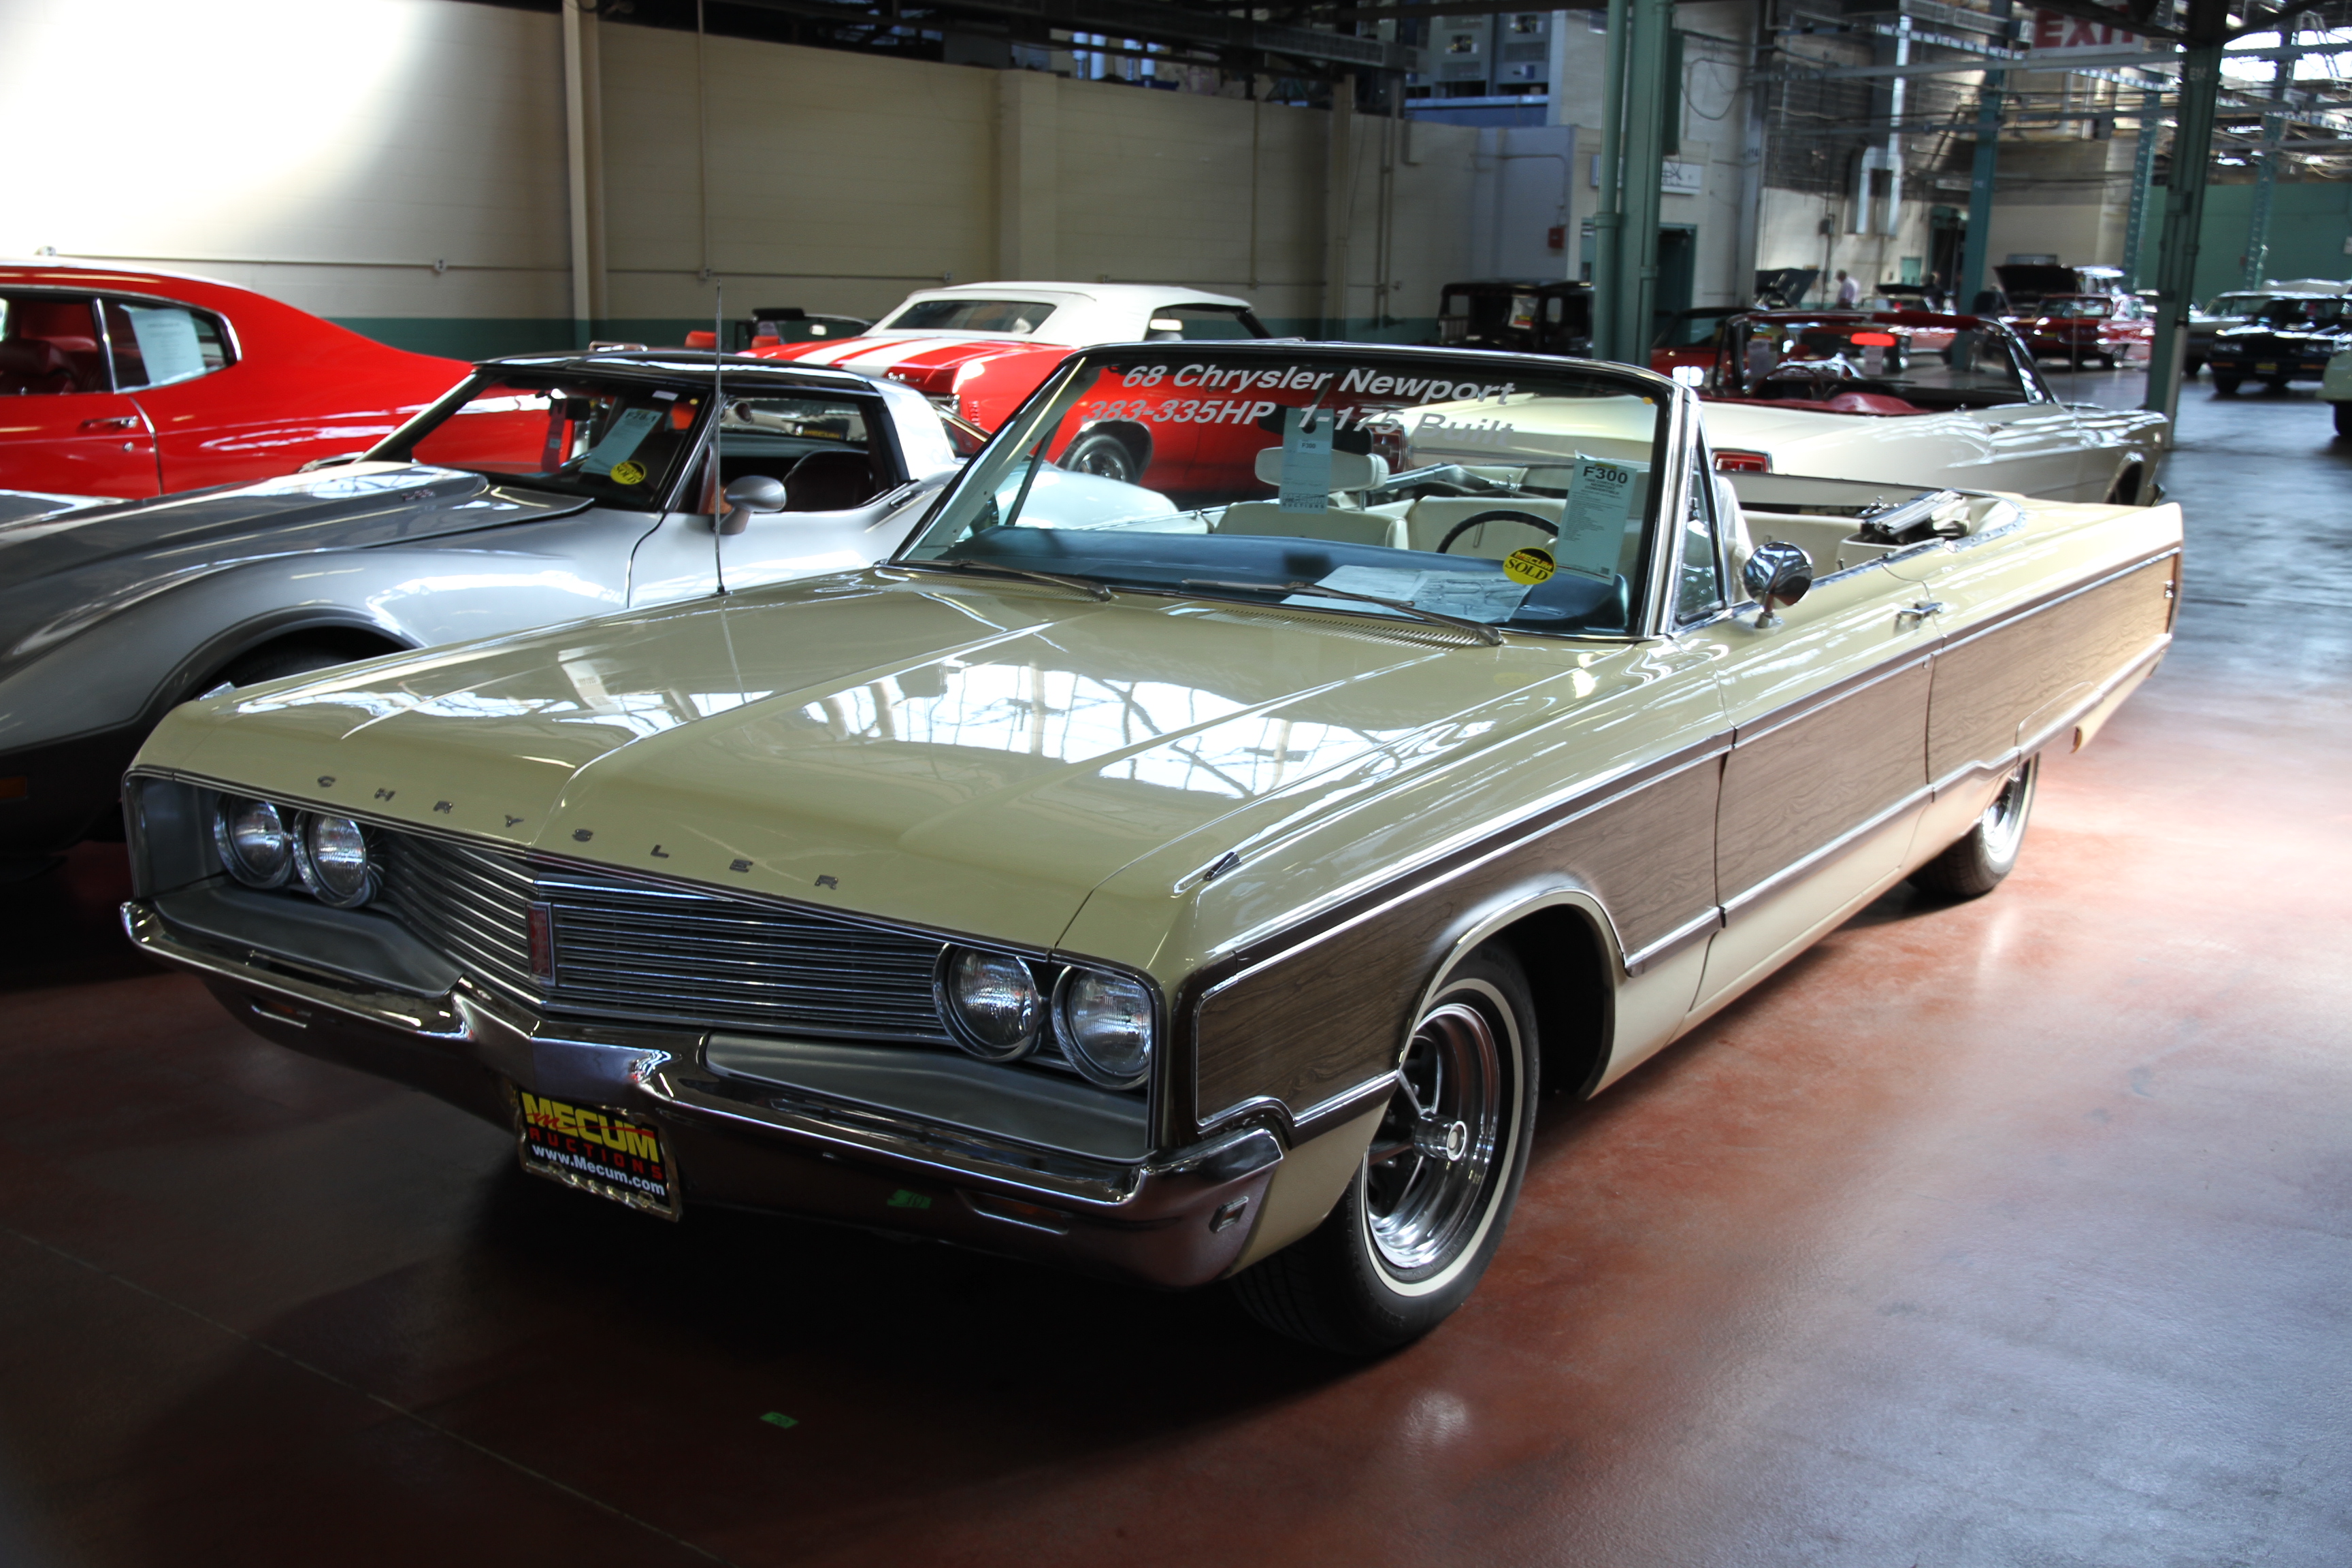 1967 chrysler newport town & country